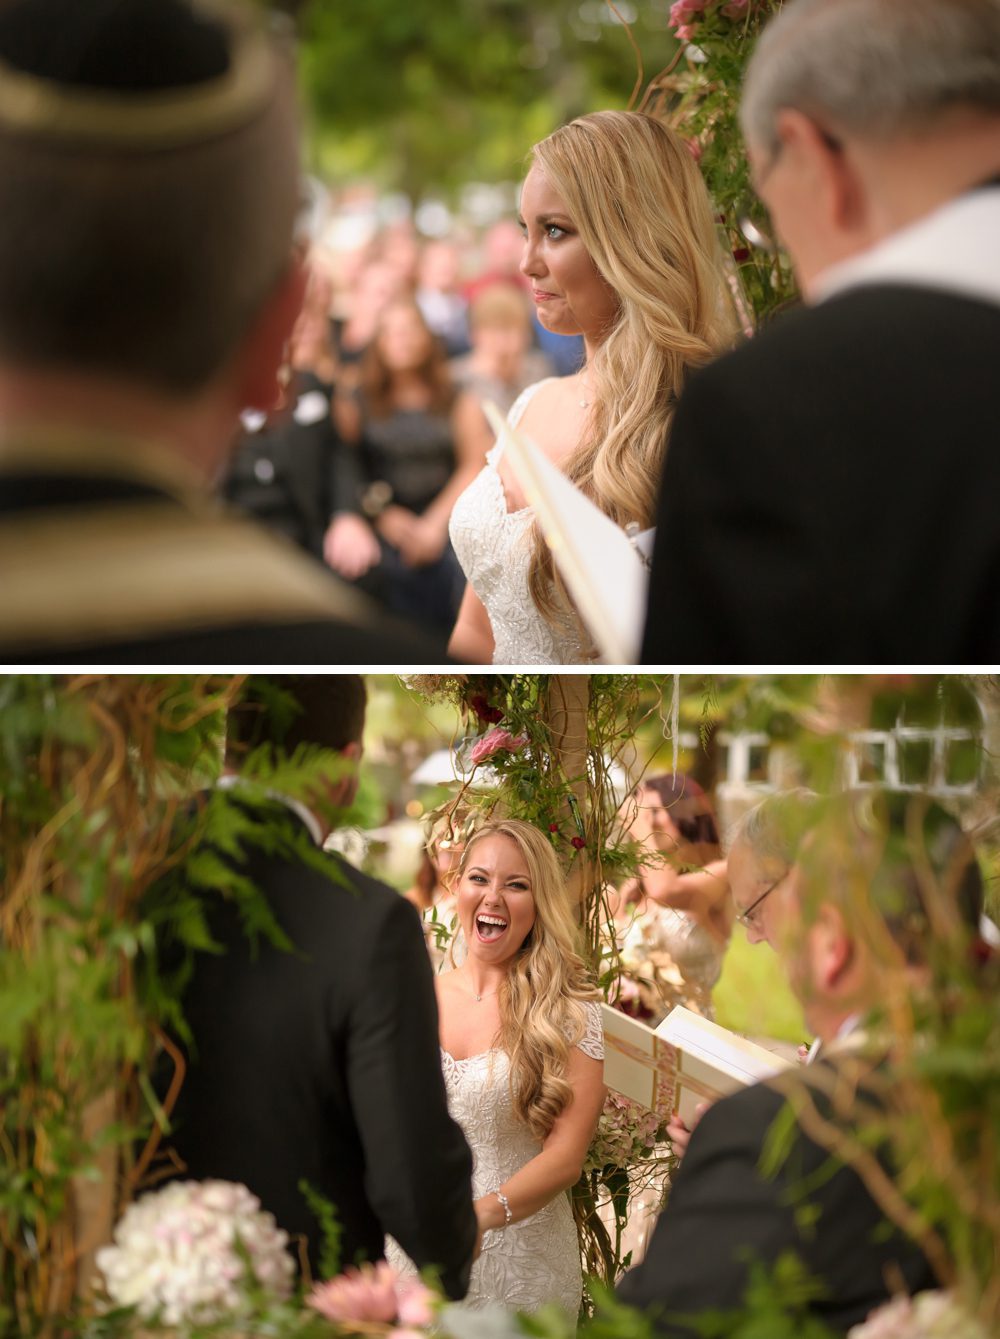 Bride excited to say I DO Poirier Wedding Photography